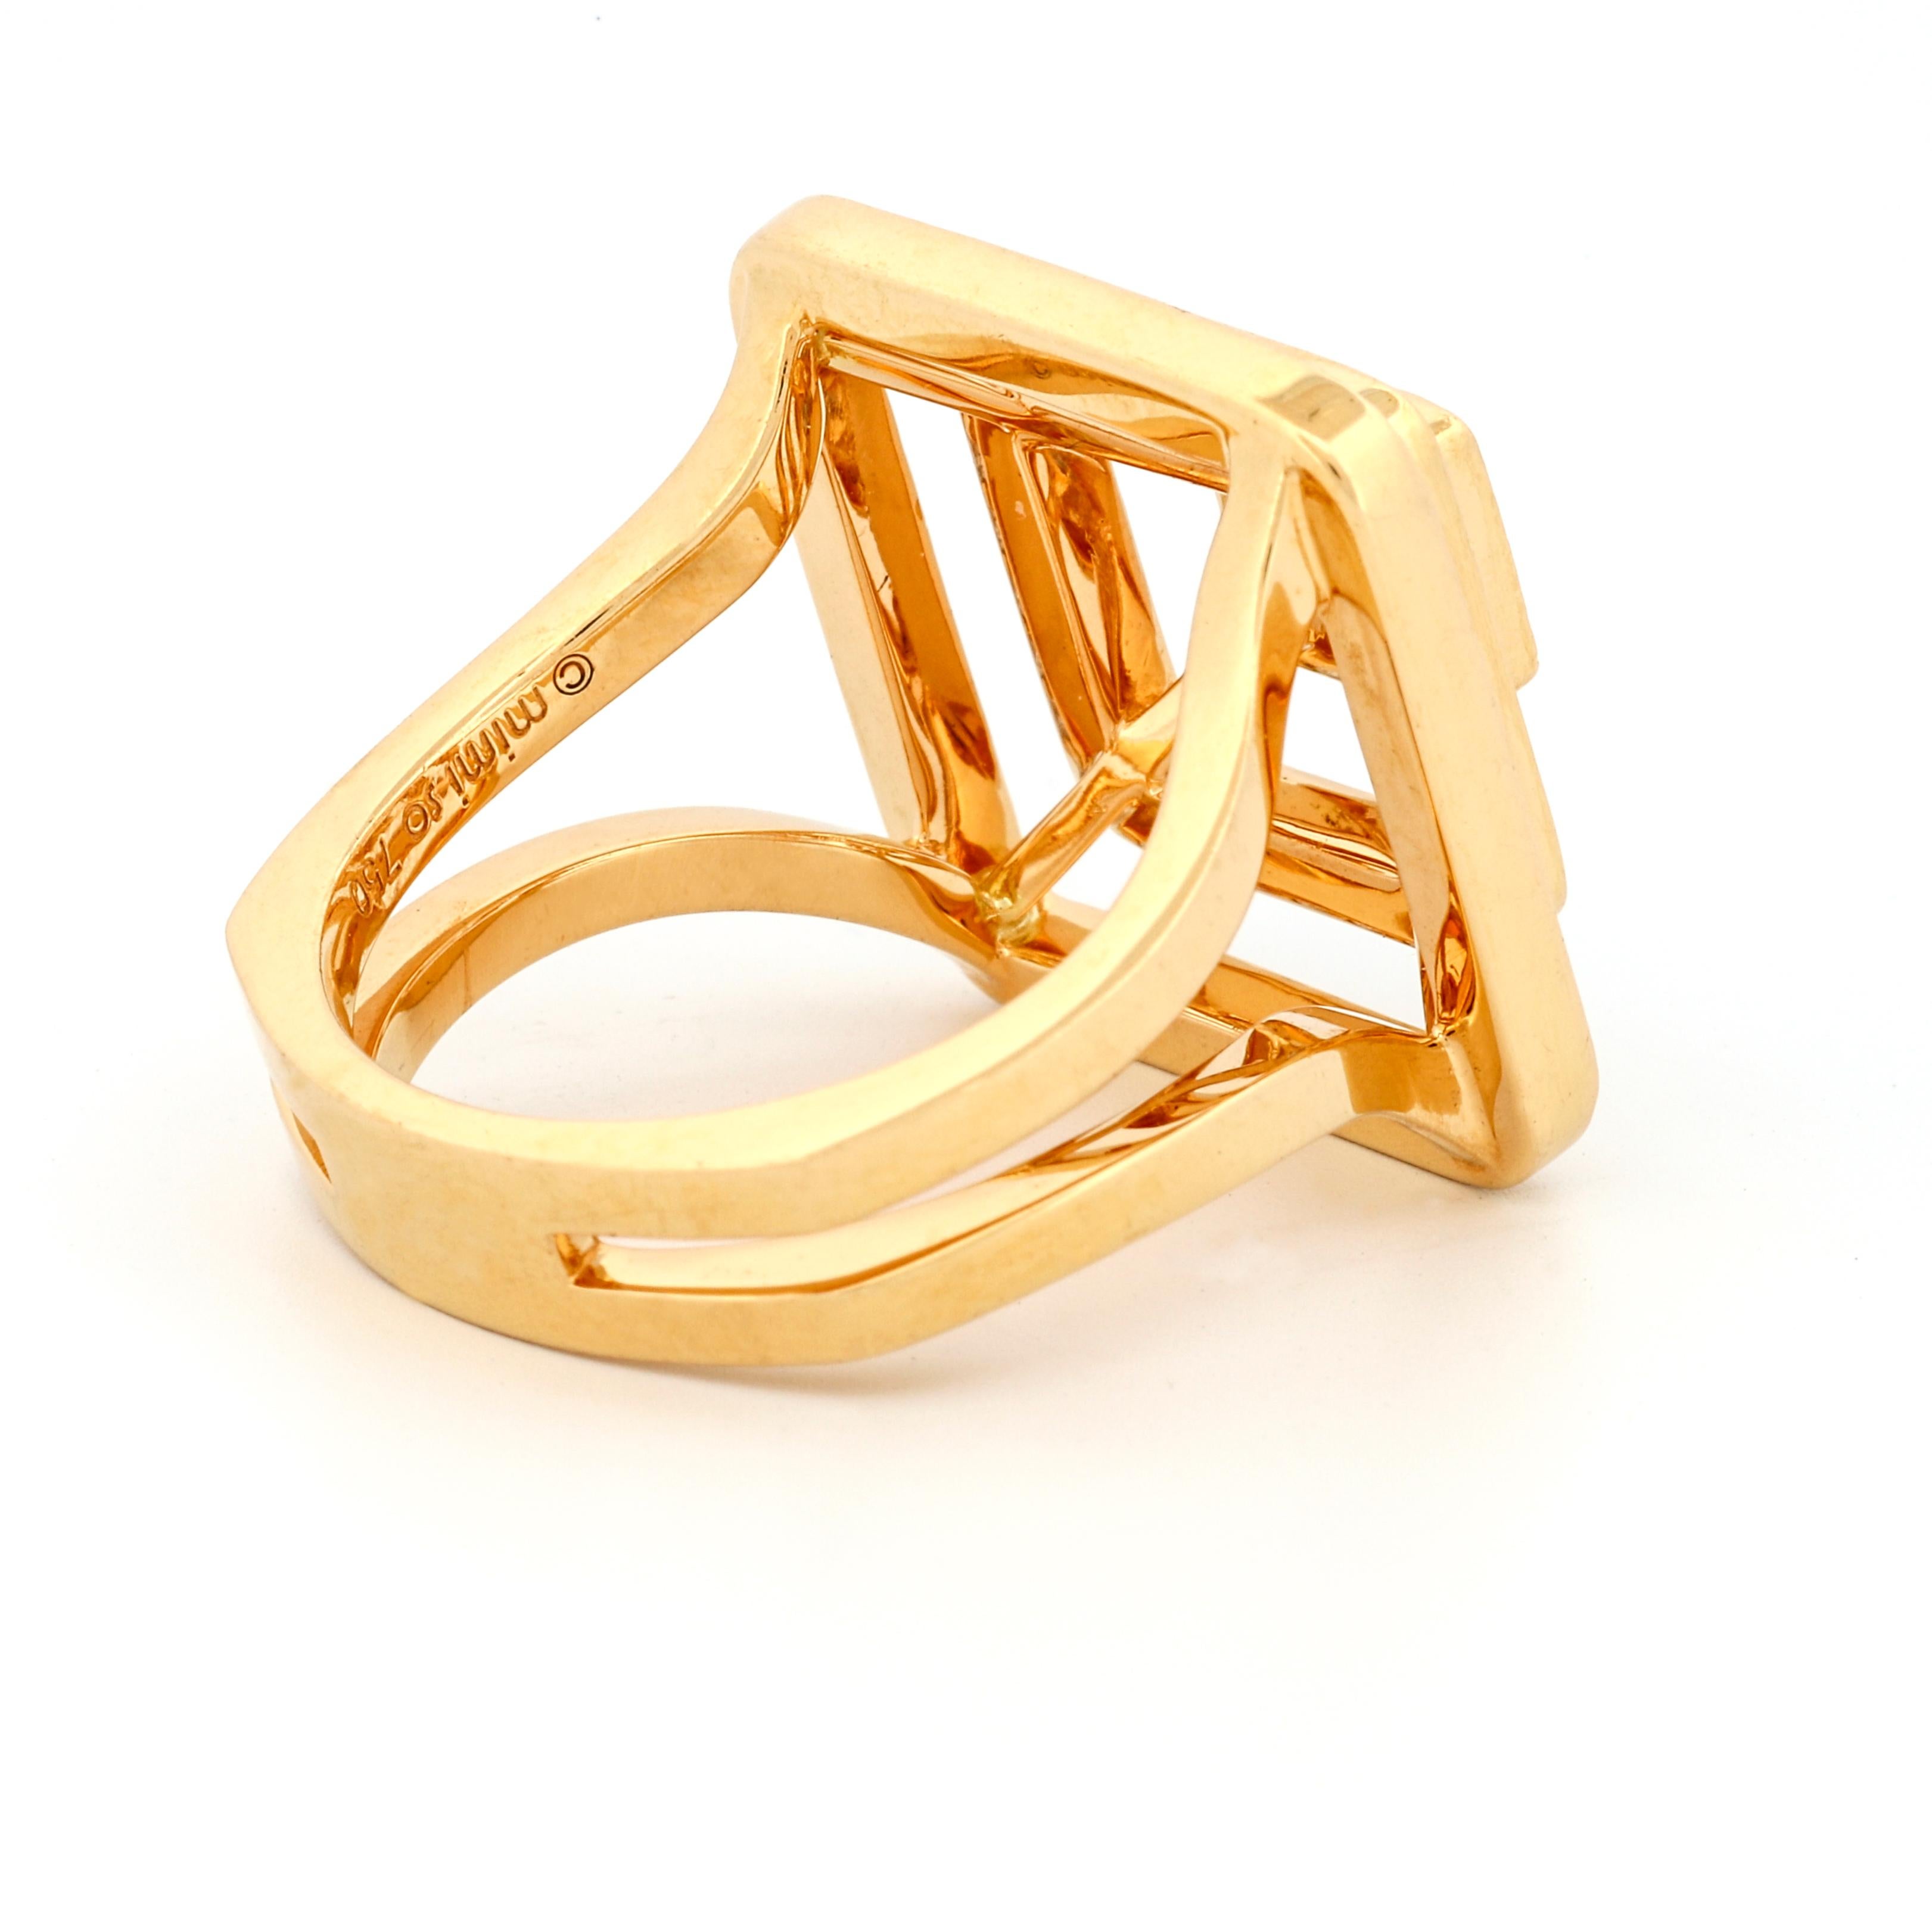 Modern Mimi So Piece Pyramid Diamond Ring in 18k Yellow Gold Size 6.5 For Sale